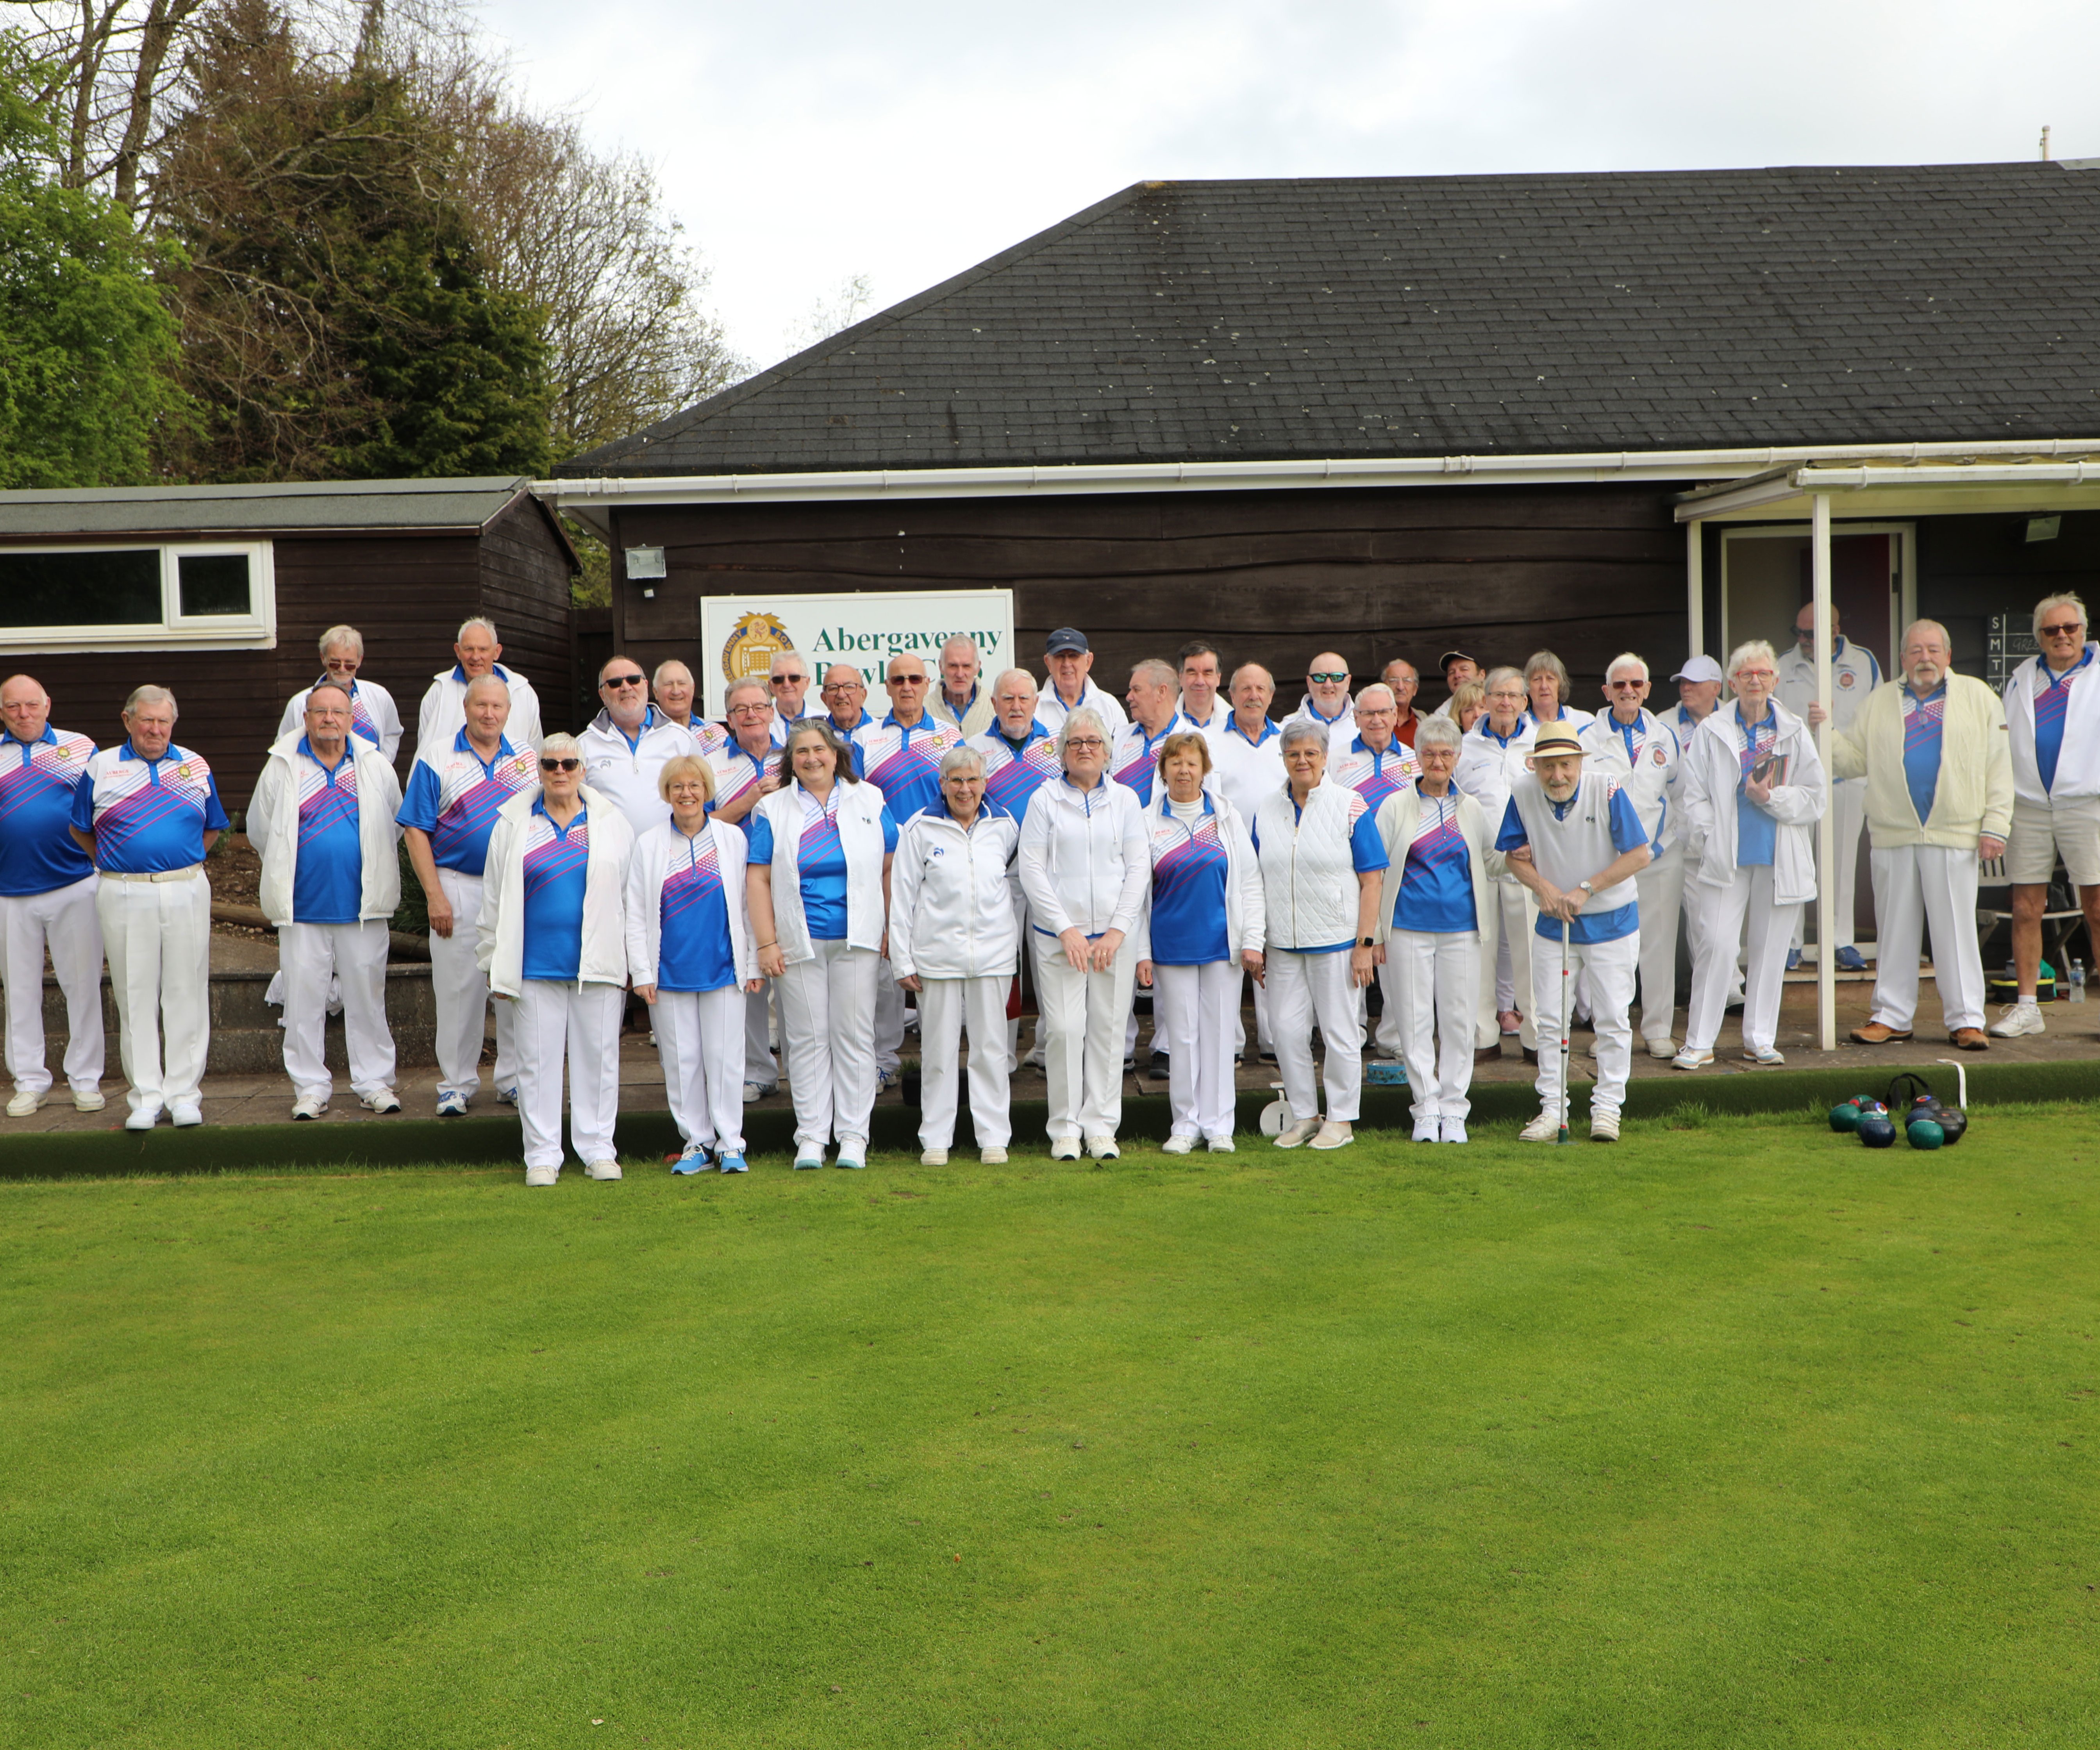 Saints on high as Abergavenny miss out in bowls friendly